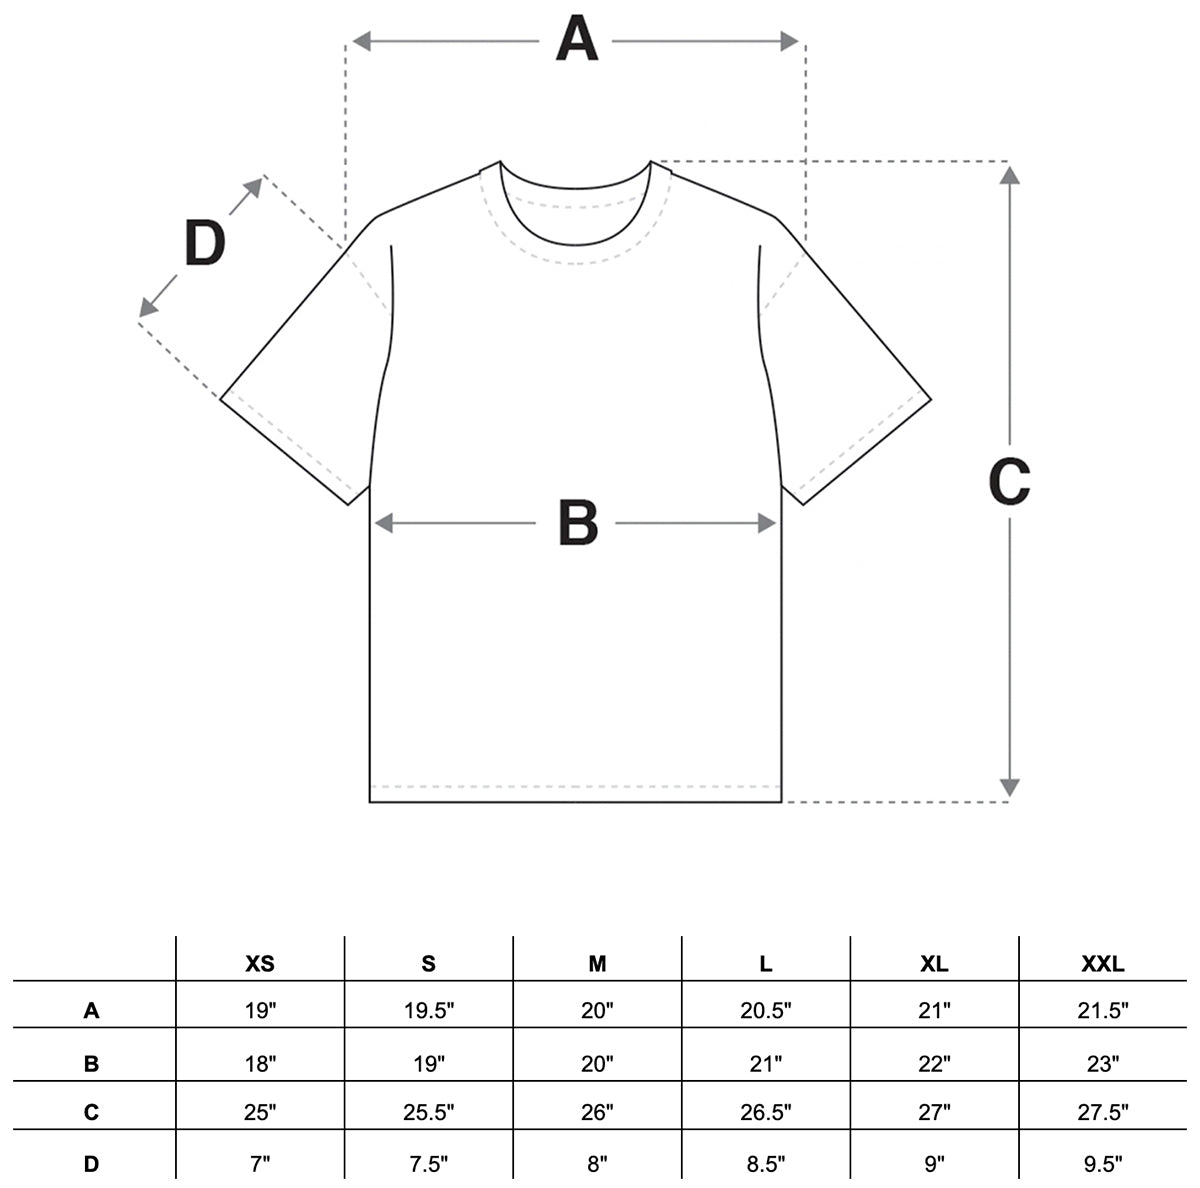 Field Research Division T-Shirt in Grey Size Guide